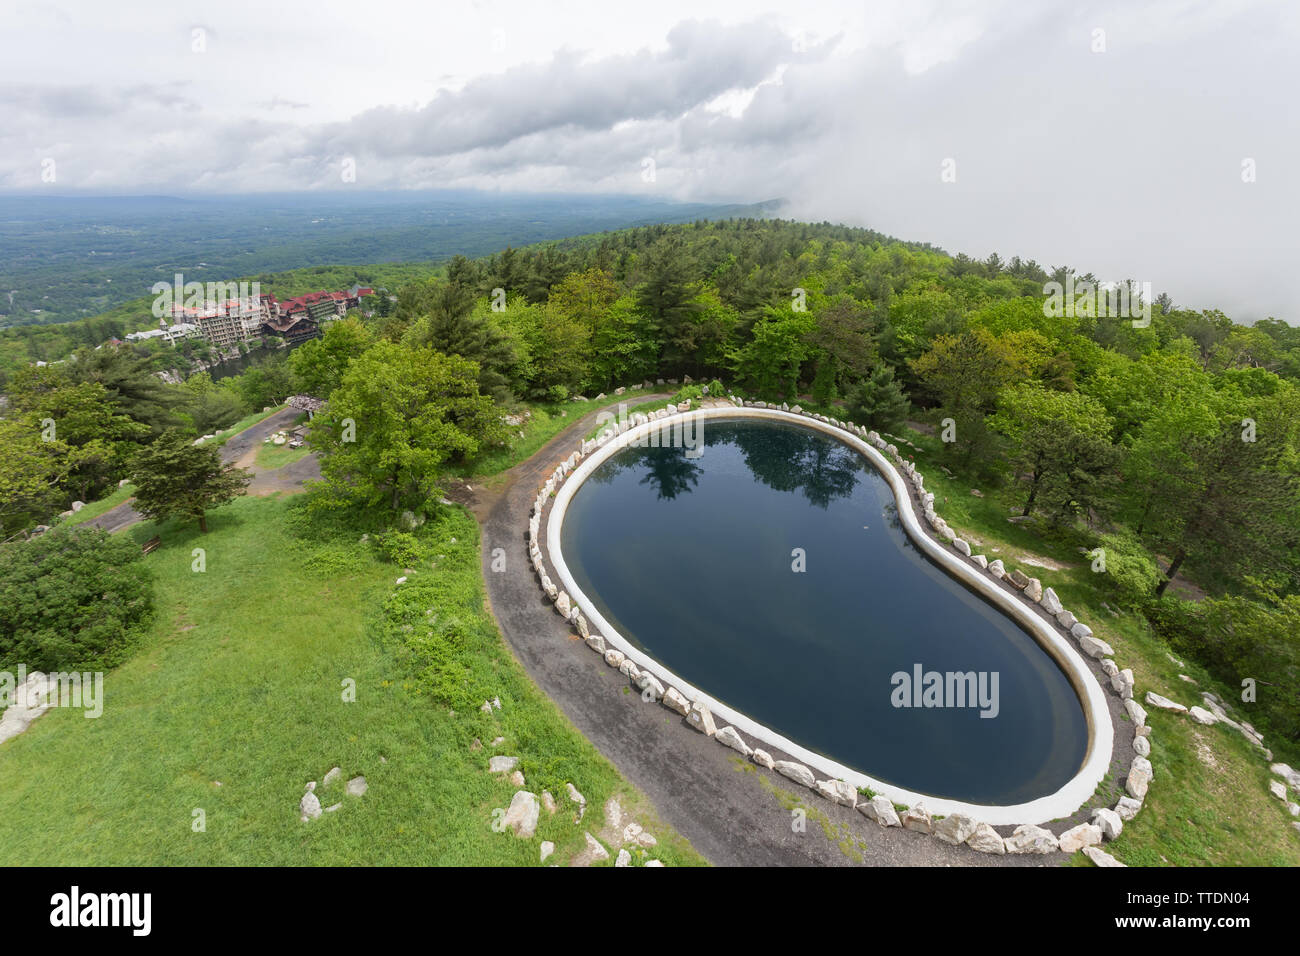 The Skytop reservoir at Mohonk Mountain House in New Paltz, New York minutes after the fog lifted. Stock Photo